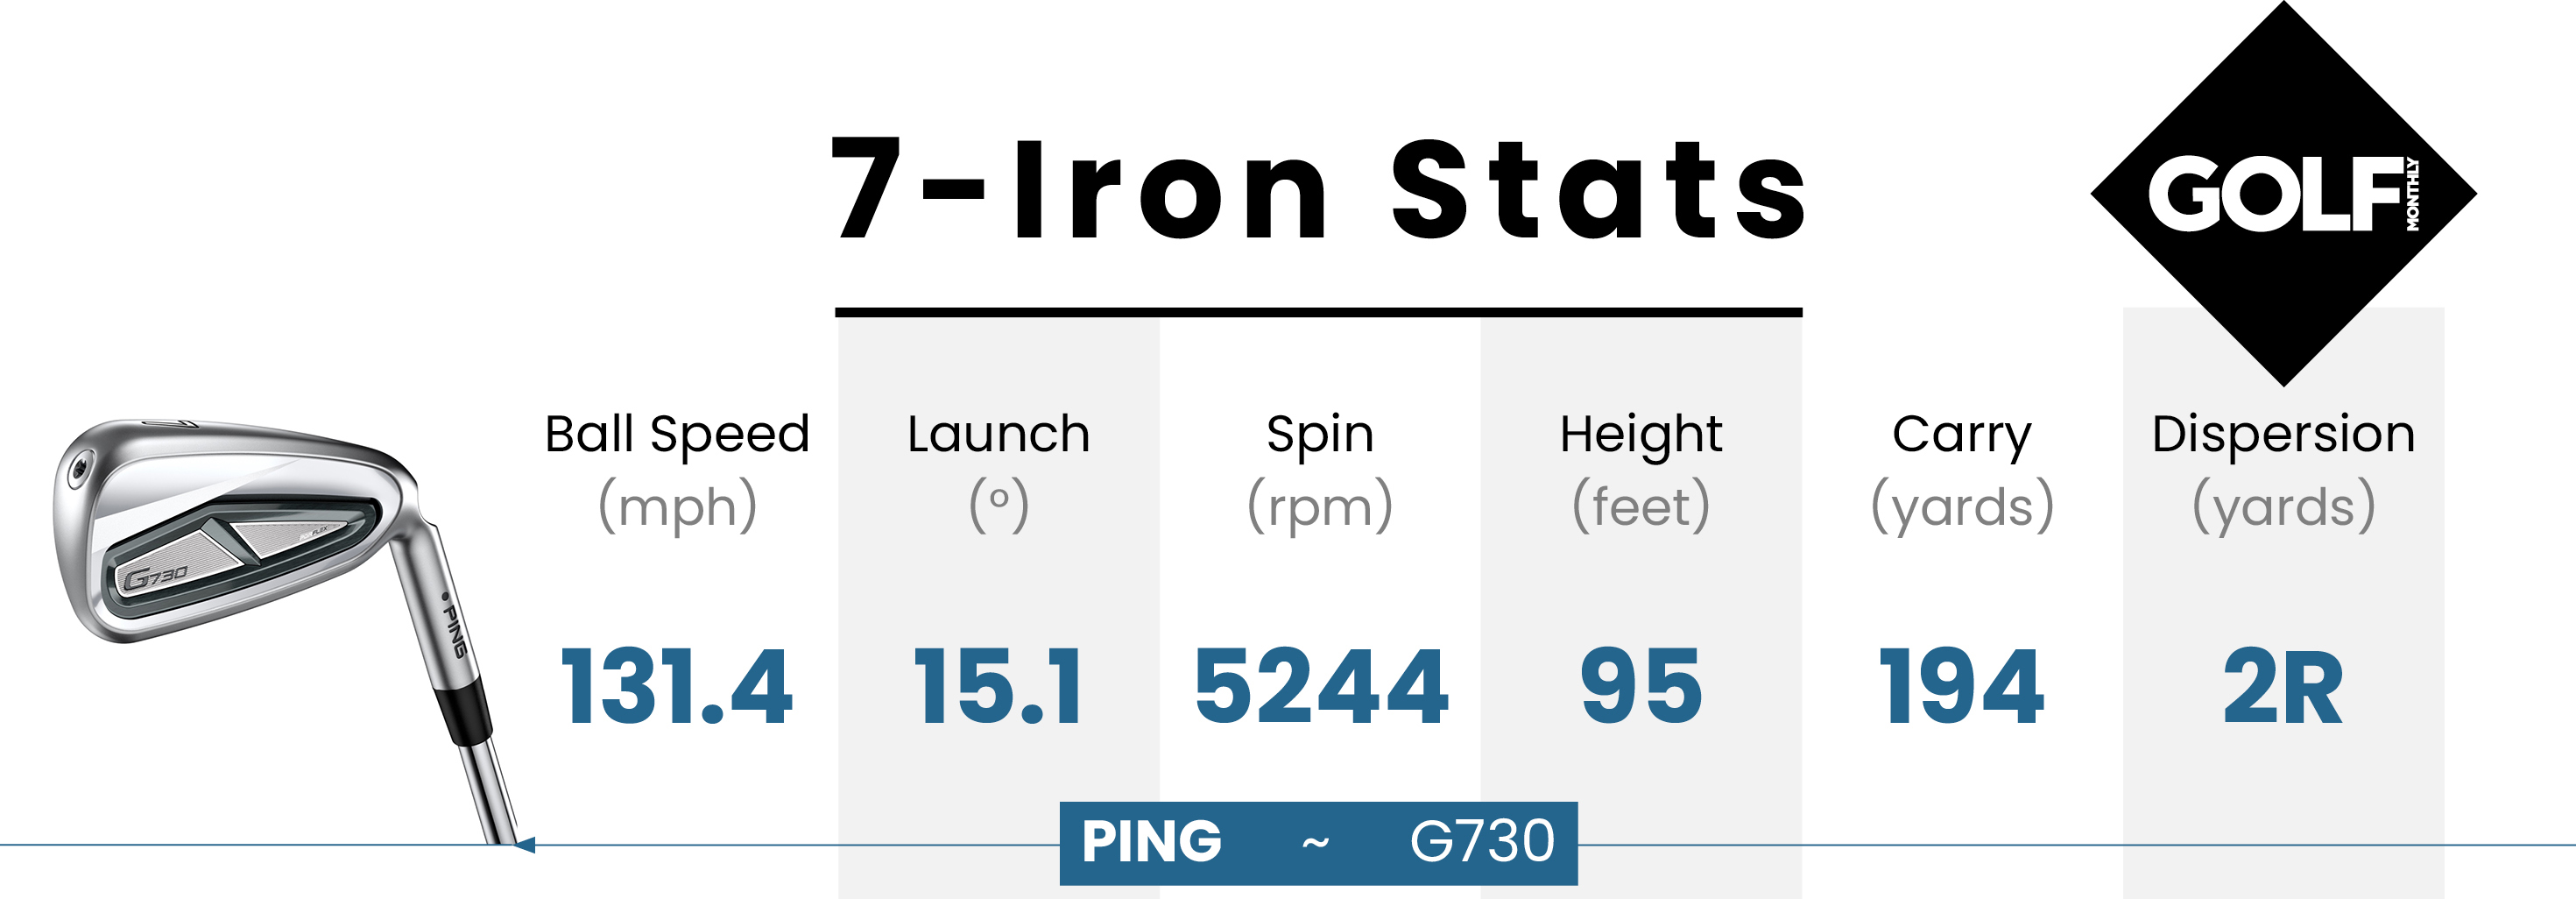 Data table from the Ping g730 Iron